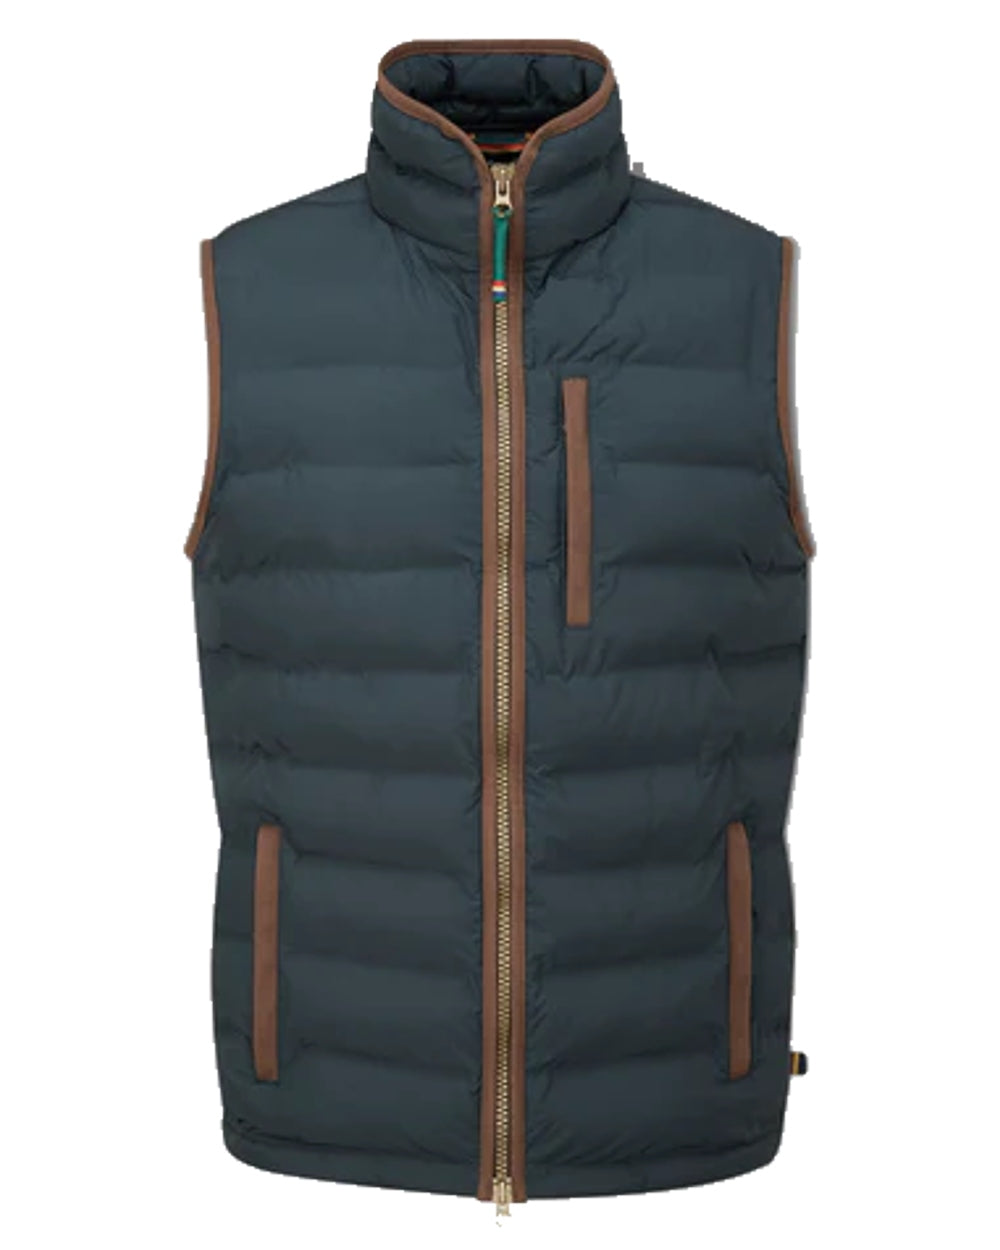 Navy coloured Alan Paine Calsall Waistcoat on white background 